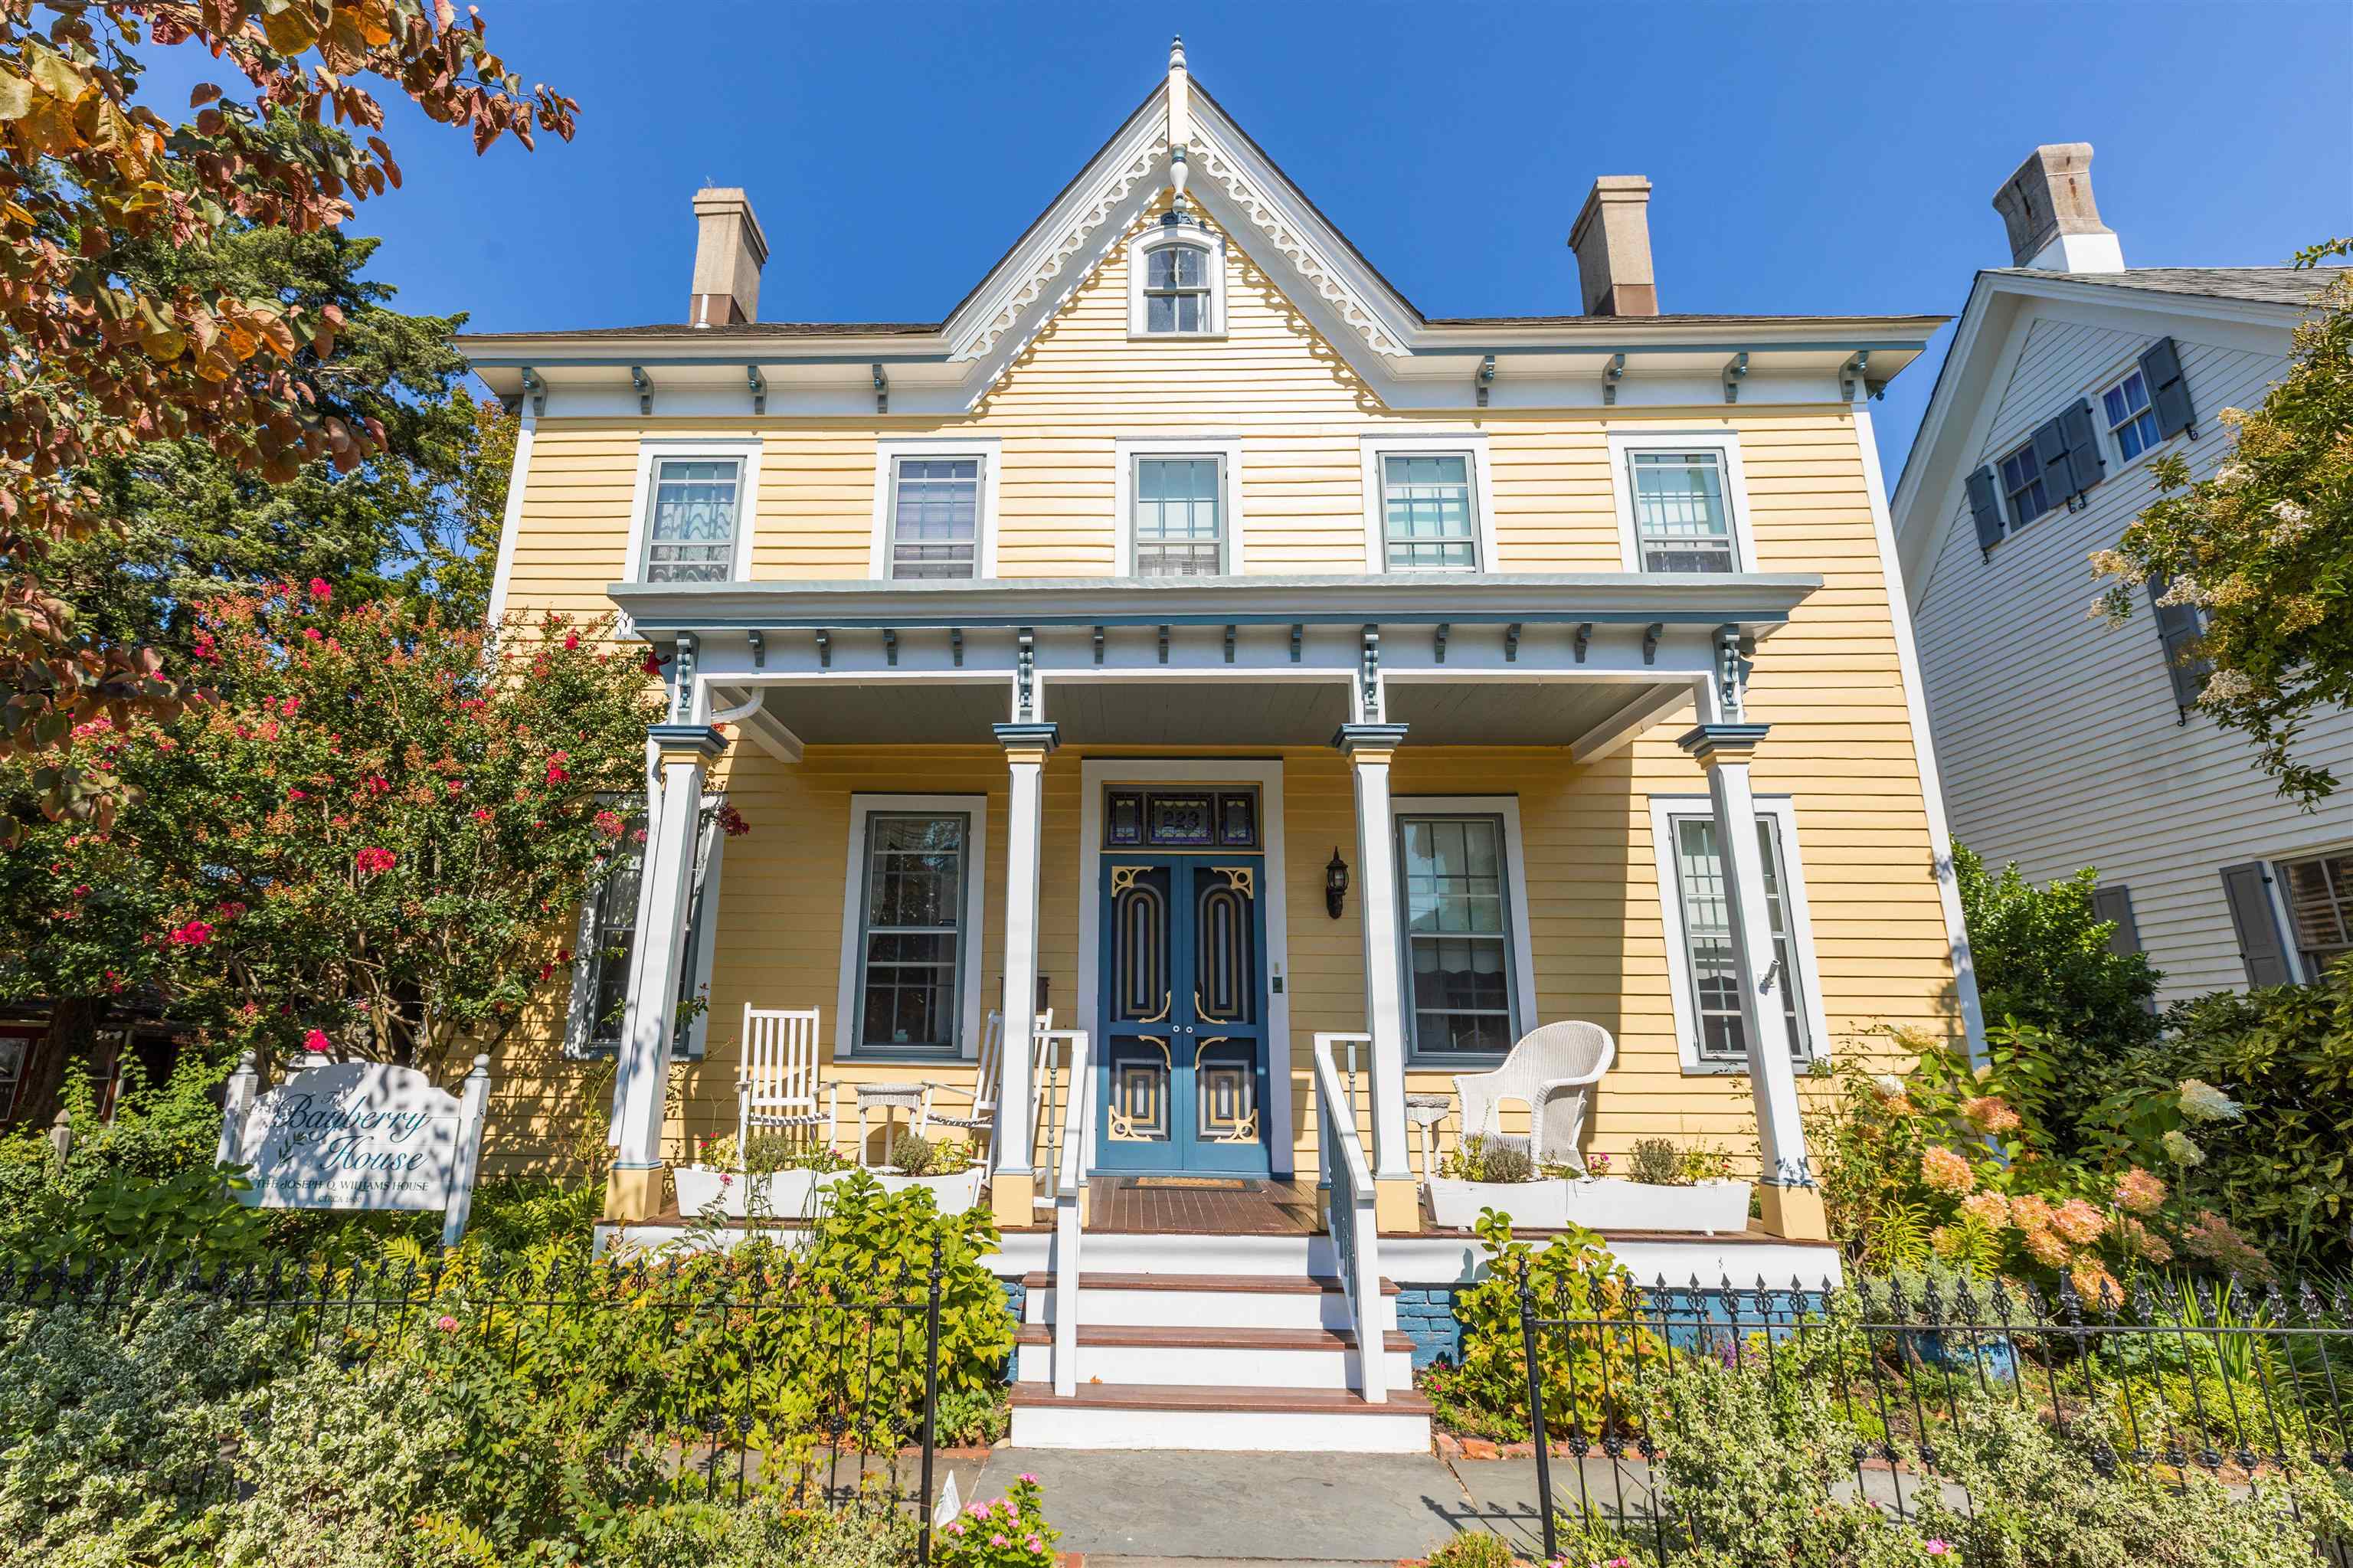 223 Perry Street - Cape May